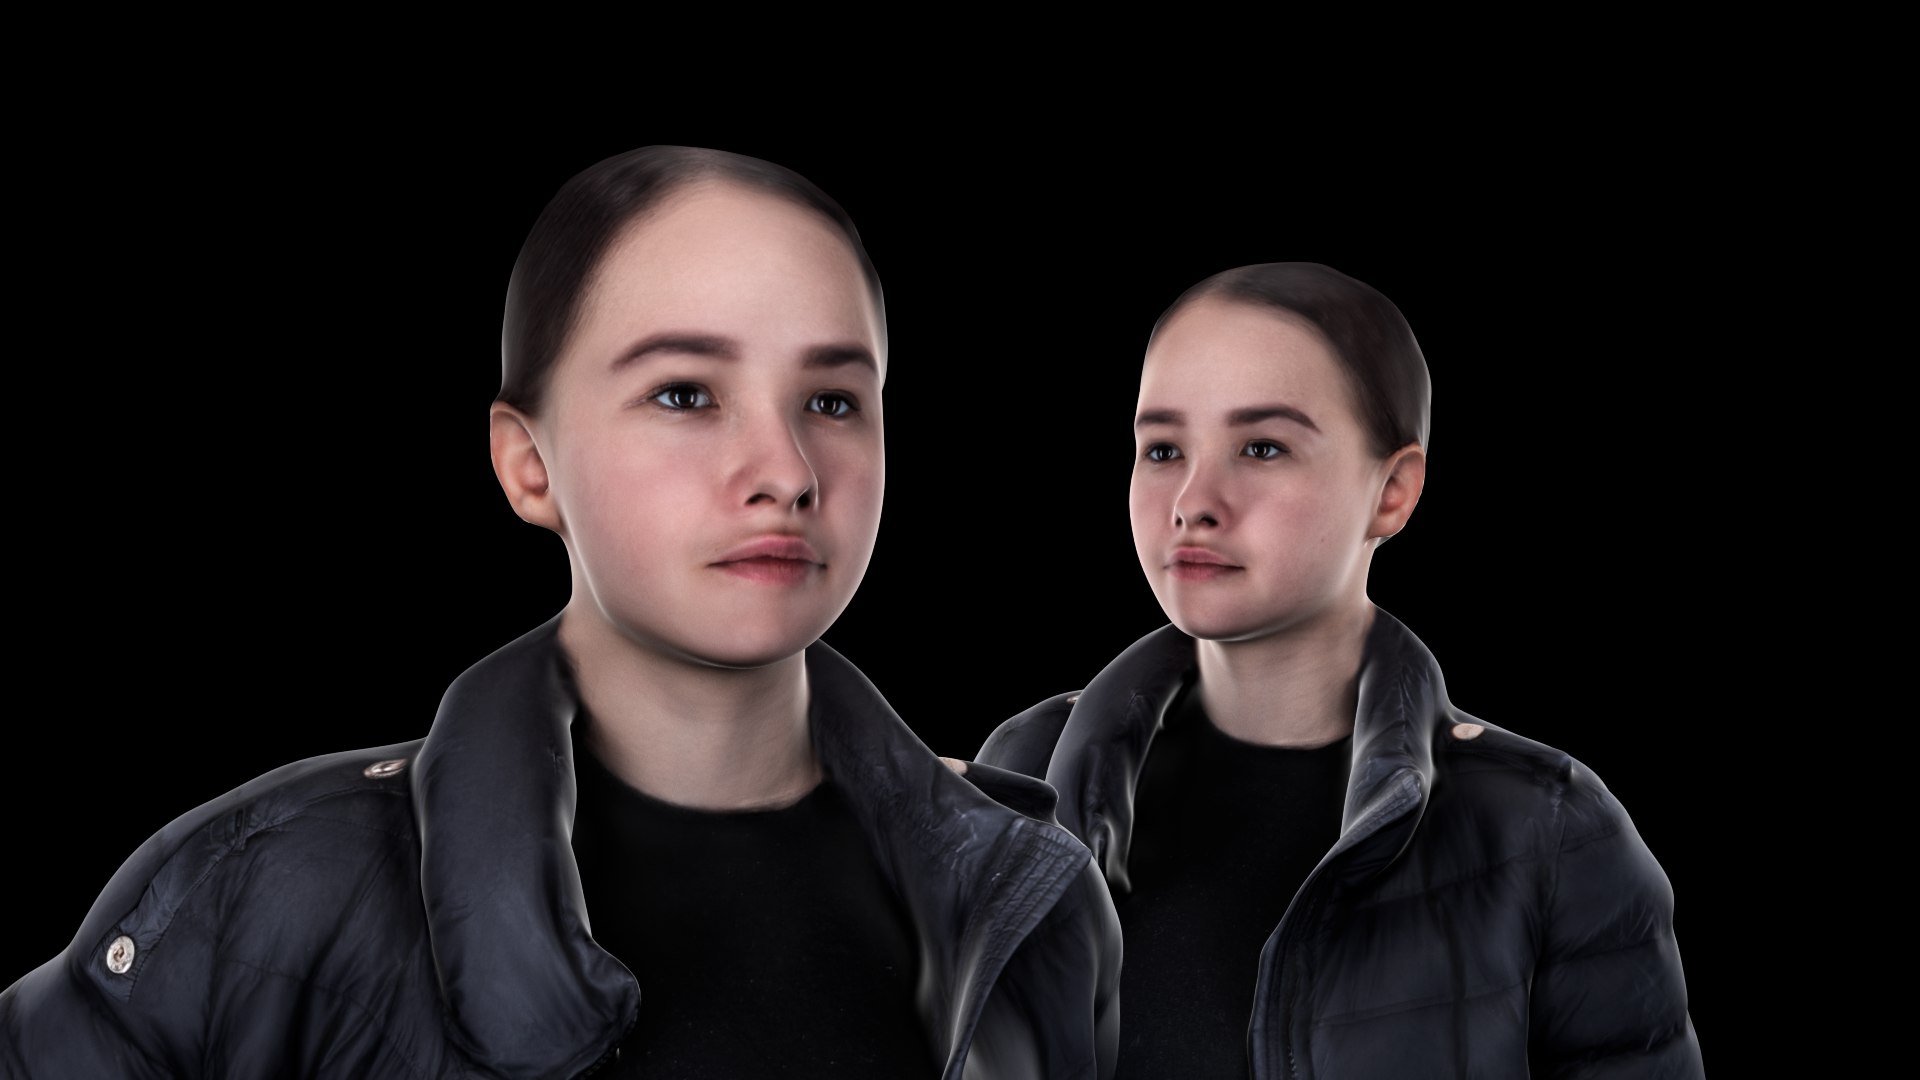 Human Young Woman Style 3D Model - TurboSquid 1471788